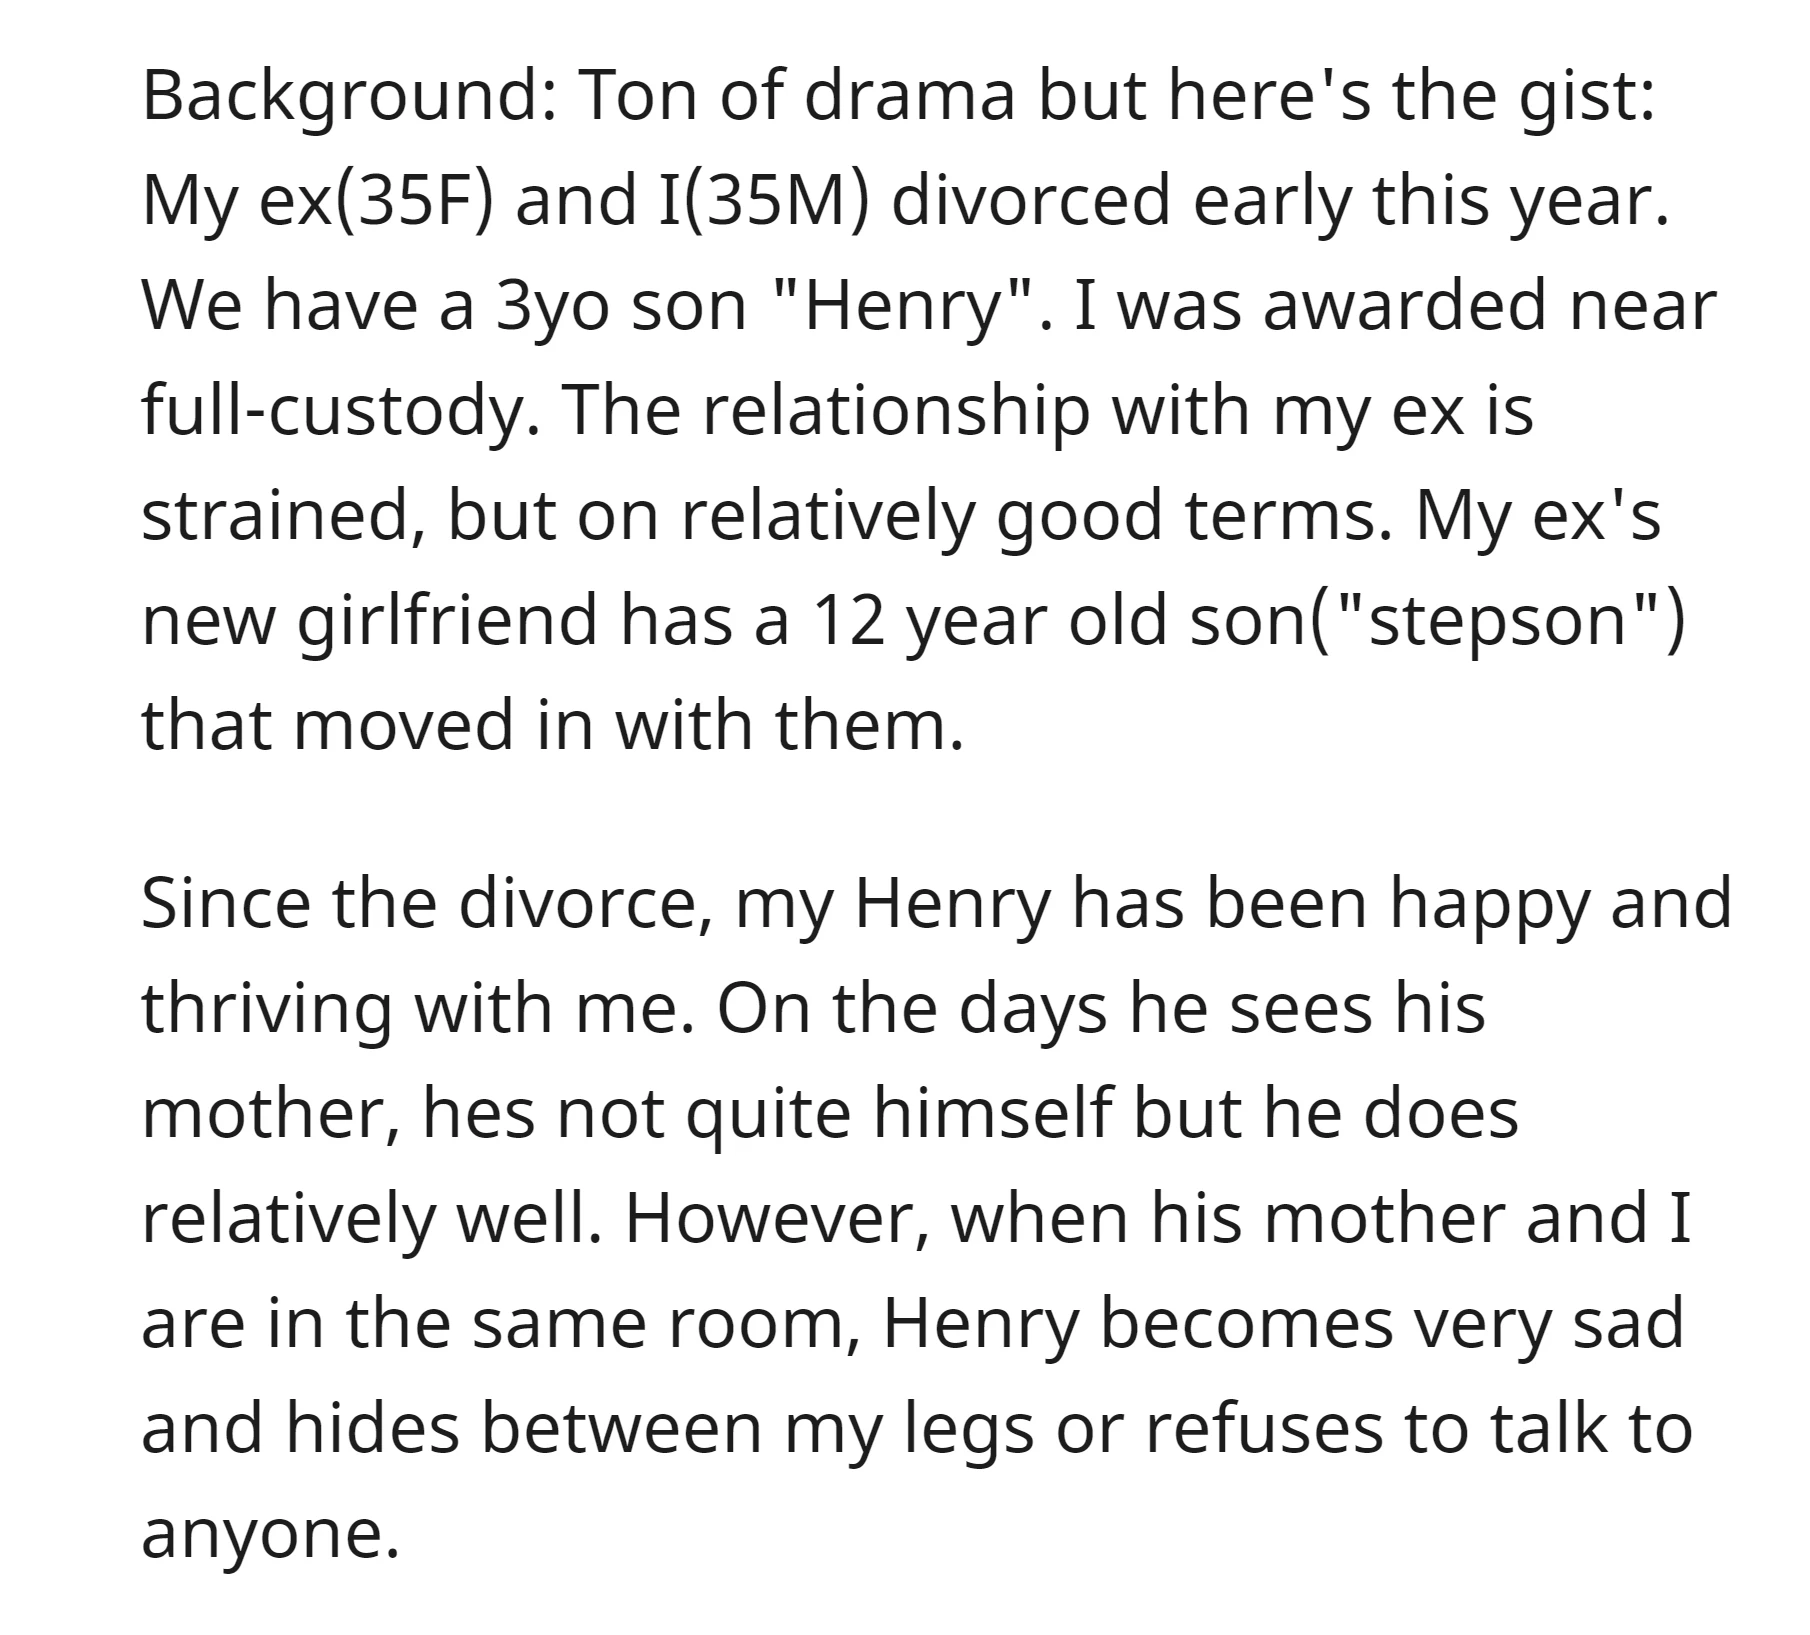 The OP's son, Henry, becomes very sad and withdrawn when his divorced parents are in the same room